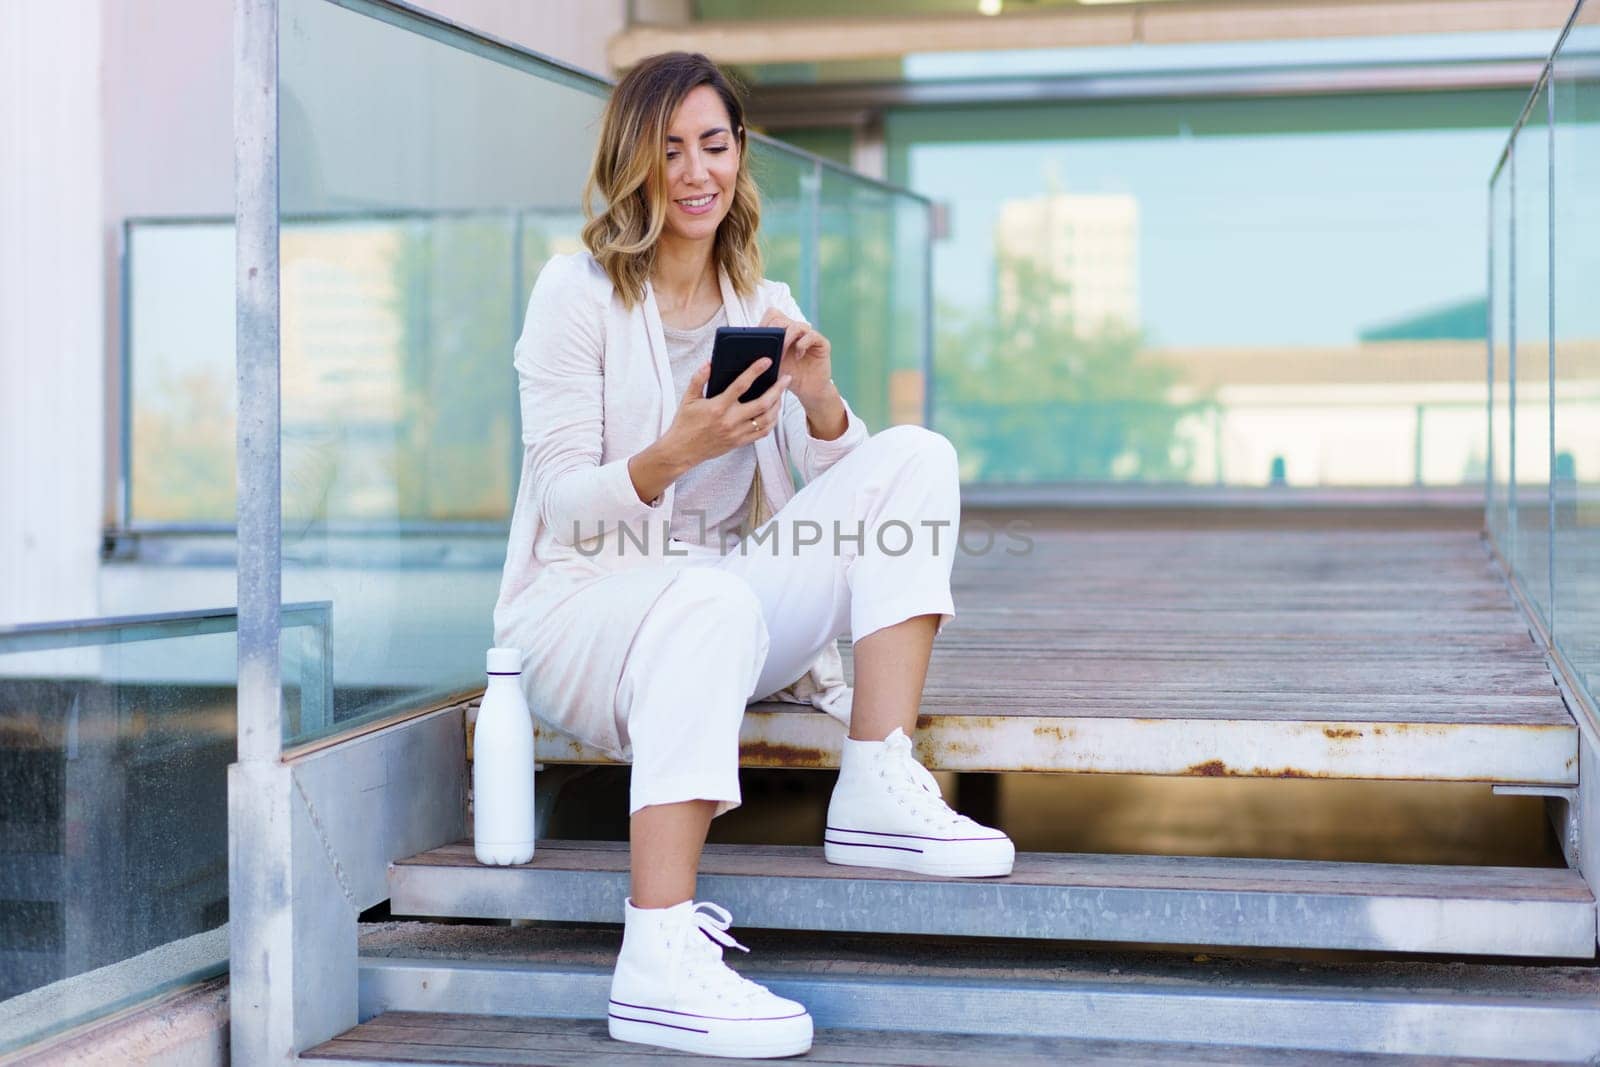 Middle aged woman taken a coffee break, sitting on steps near her office building with an eco-friendly ecological metal water bottle. Businesswoman using smartphone.